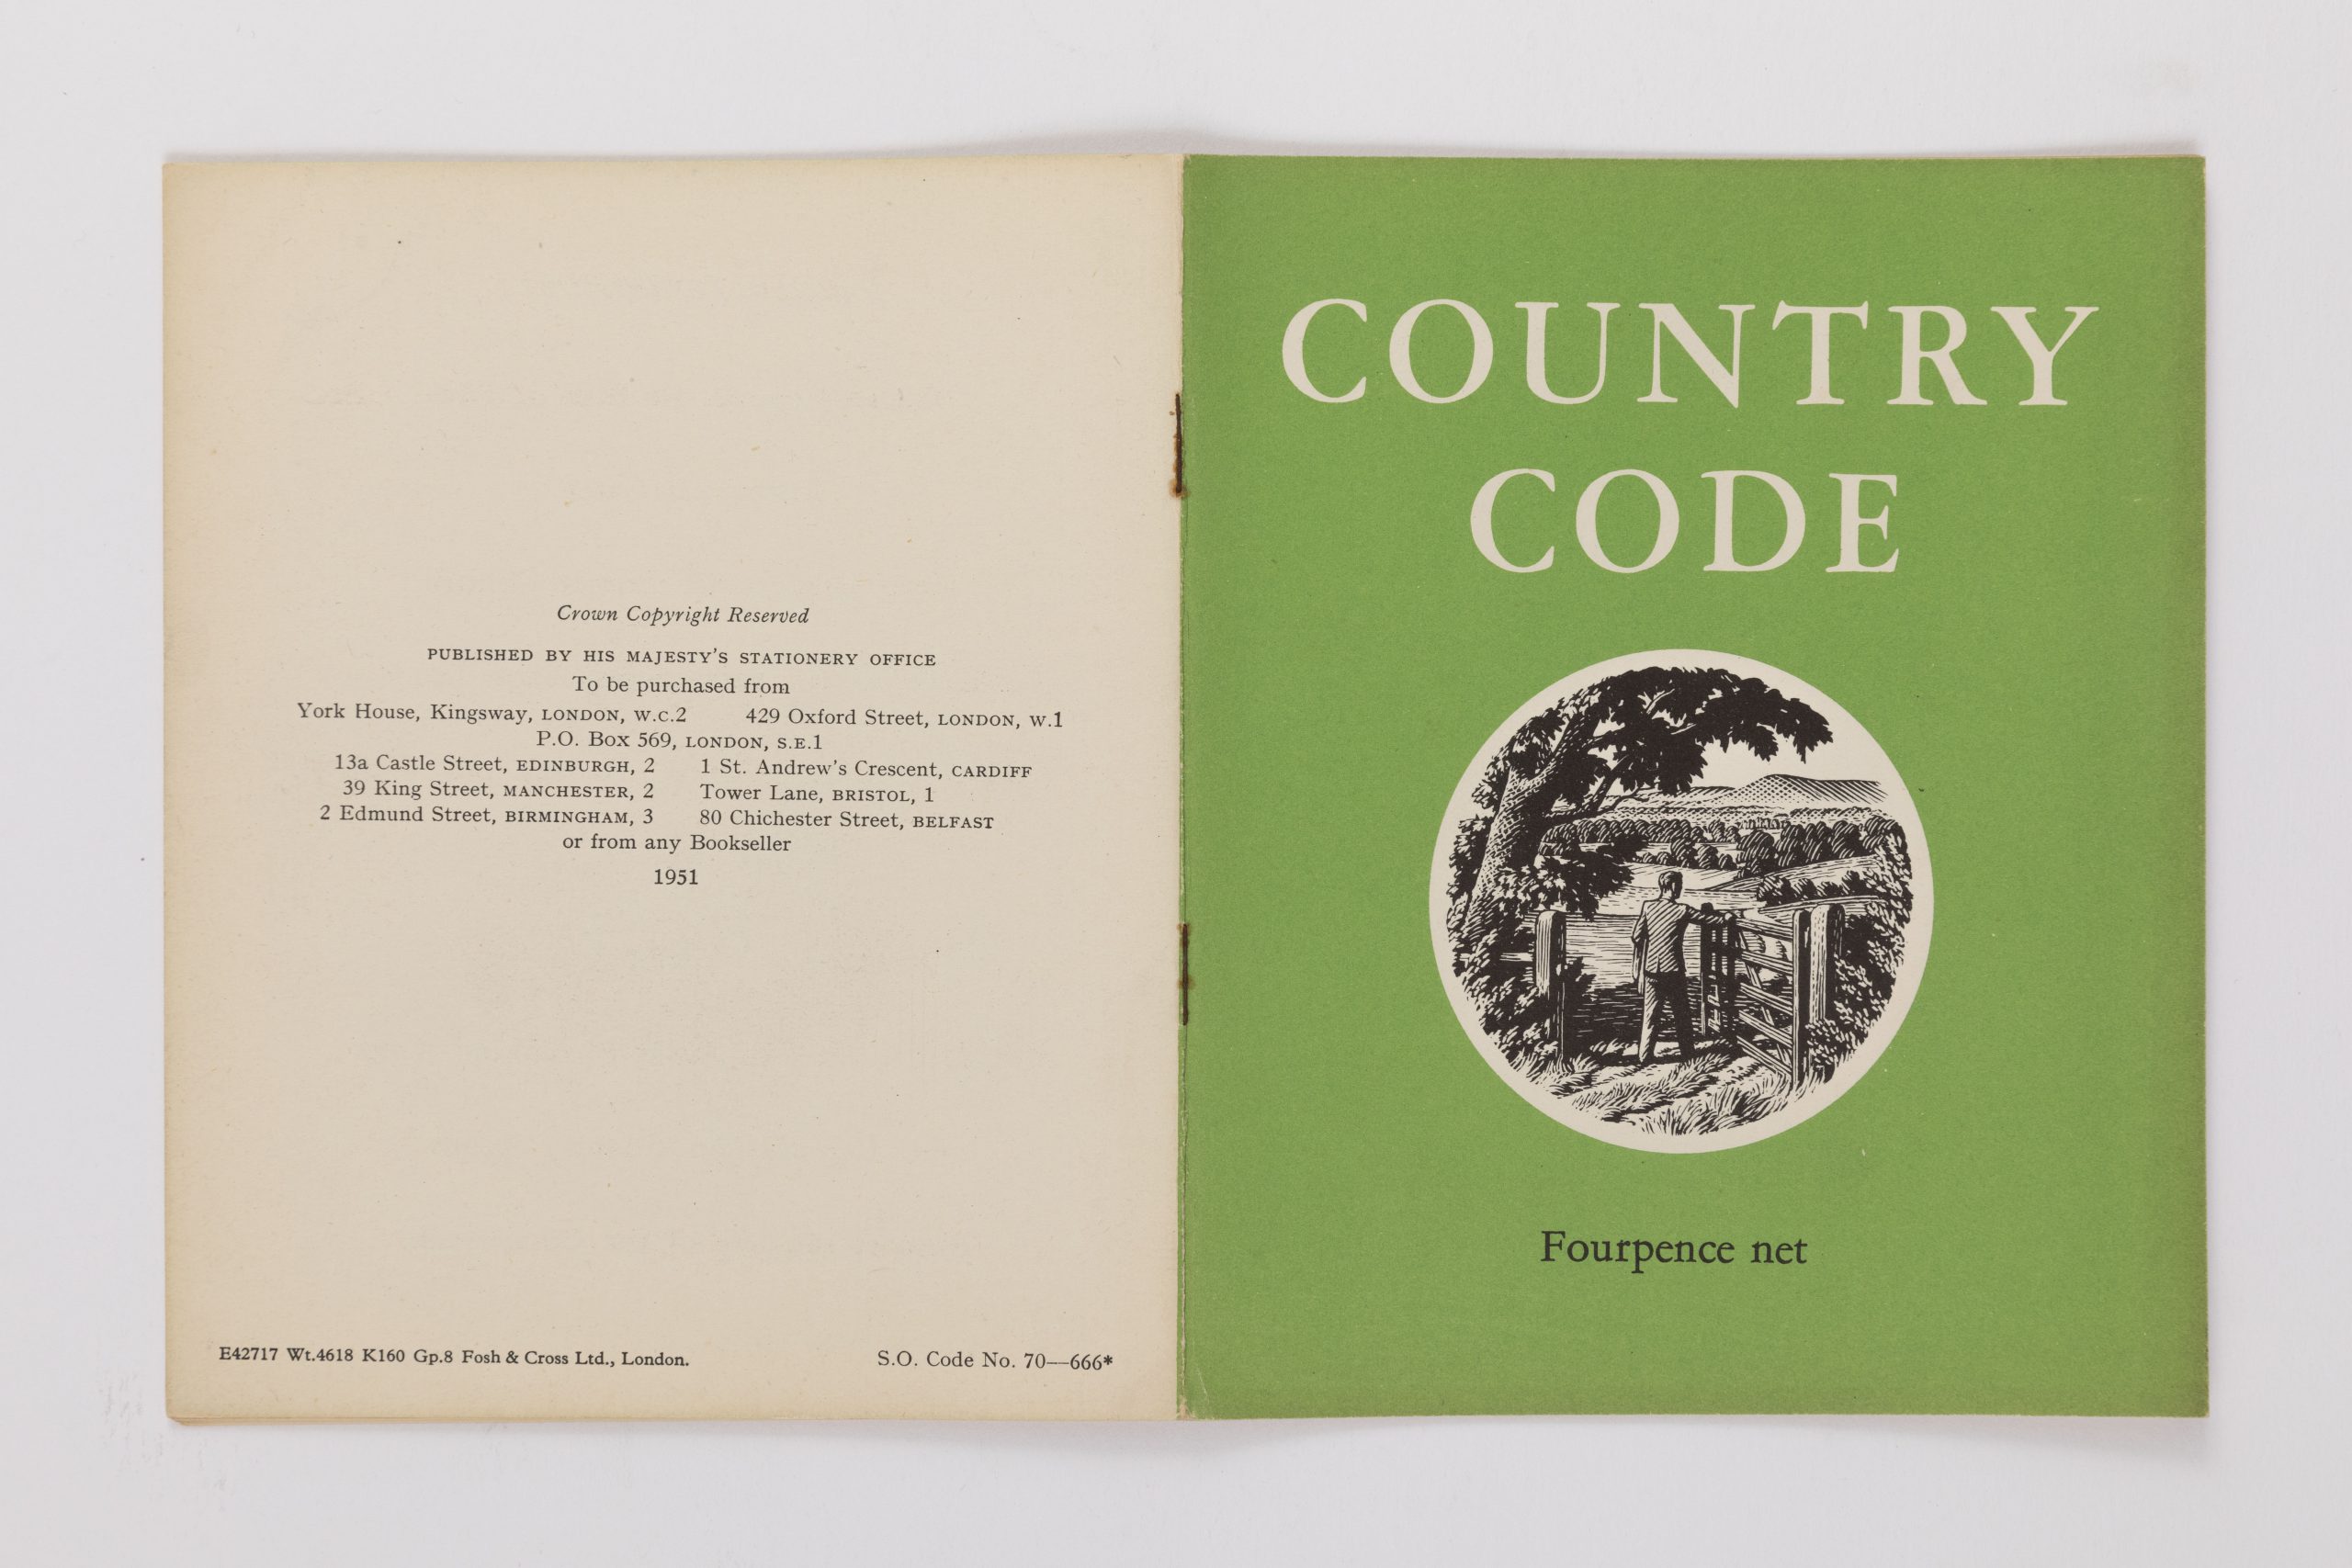 A copy of the Country Code from The MERL collection.